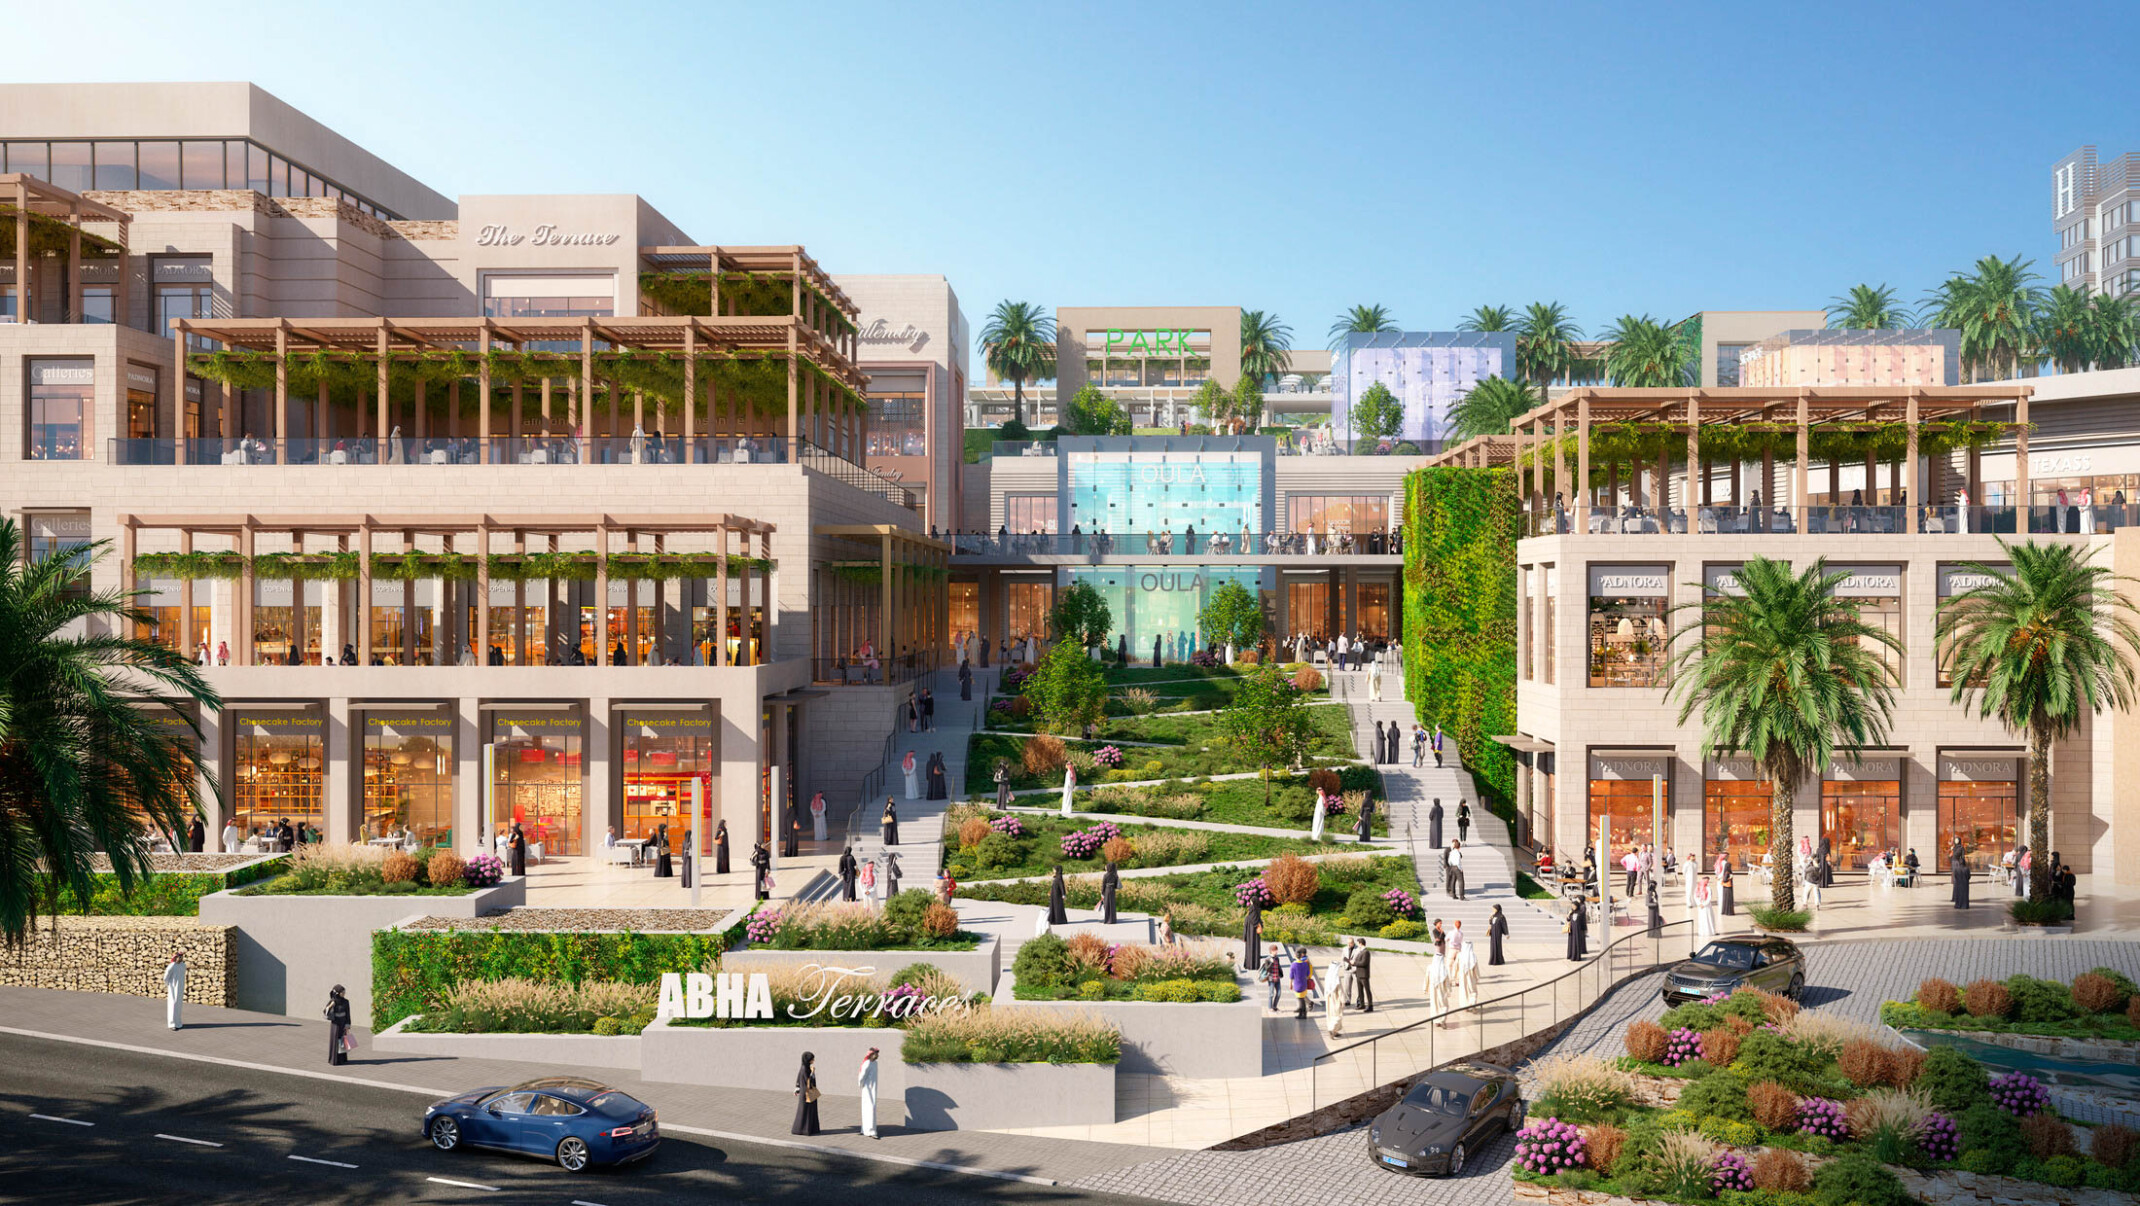 Abha Mixed-Use development in the Kingdom of Saudi Arabia. Multistory buildings around central green courtyard